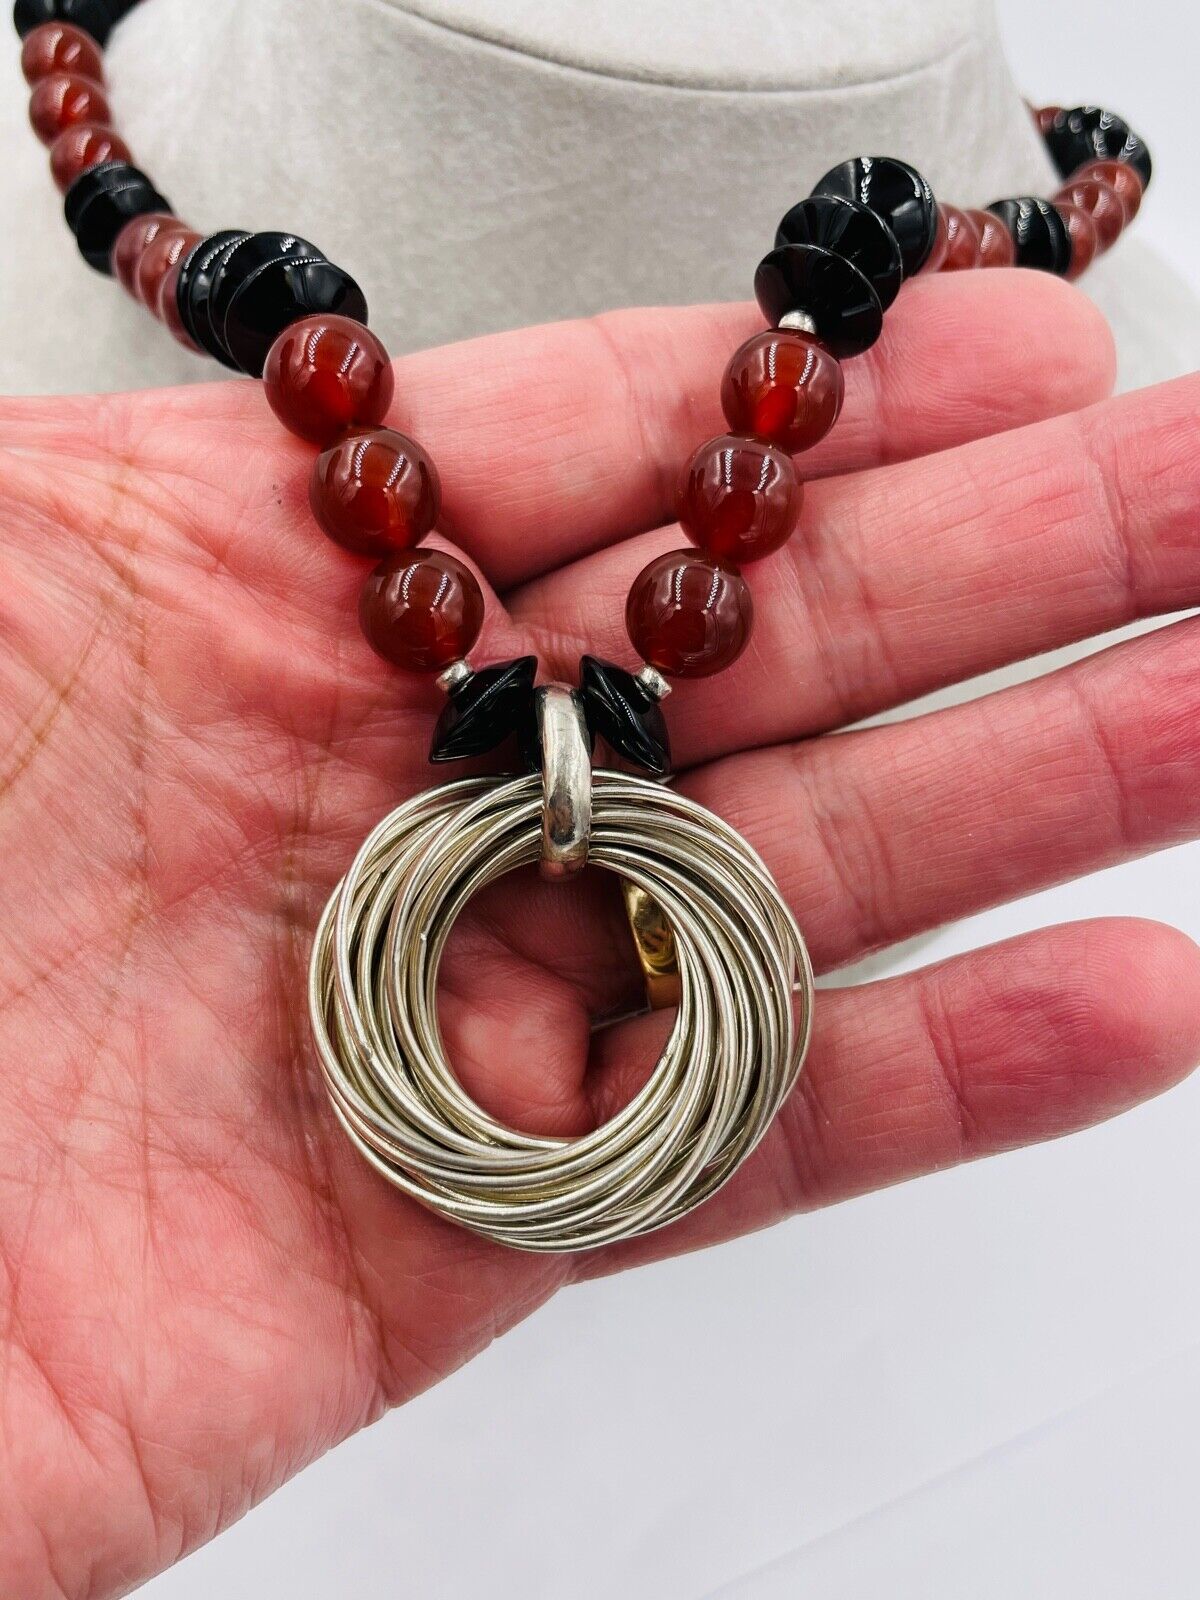 Vintage Onyx And Carnelian bead deco style Necklace sterling multi rings 20"